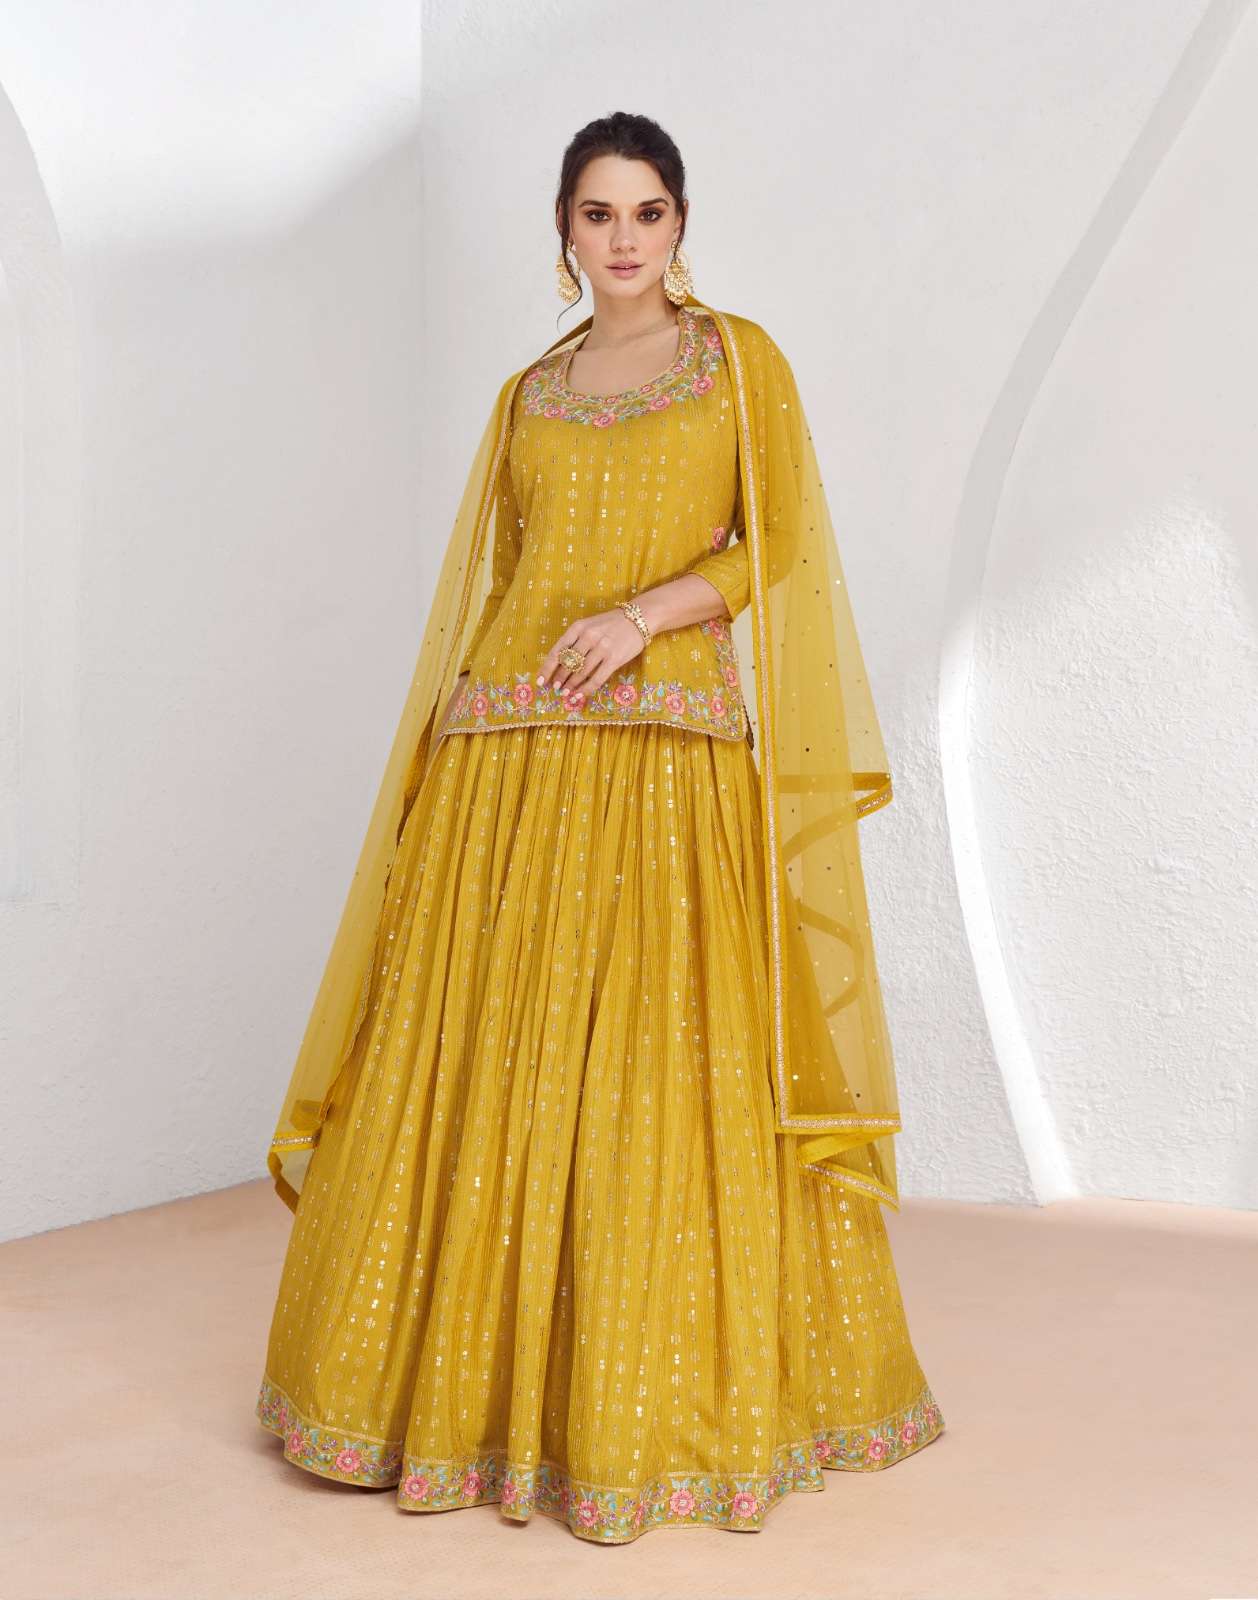 INDIAN BOLLYWOOD DESIGNER PARTY WEAR GEORGETTE YELLOW KOTI SKIRT SALWAR SUIT CUM LEHENGA WITH THREAD SEQUENCE WORK SY AARZOO 9912